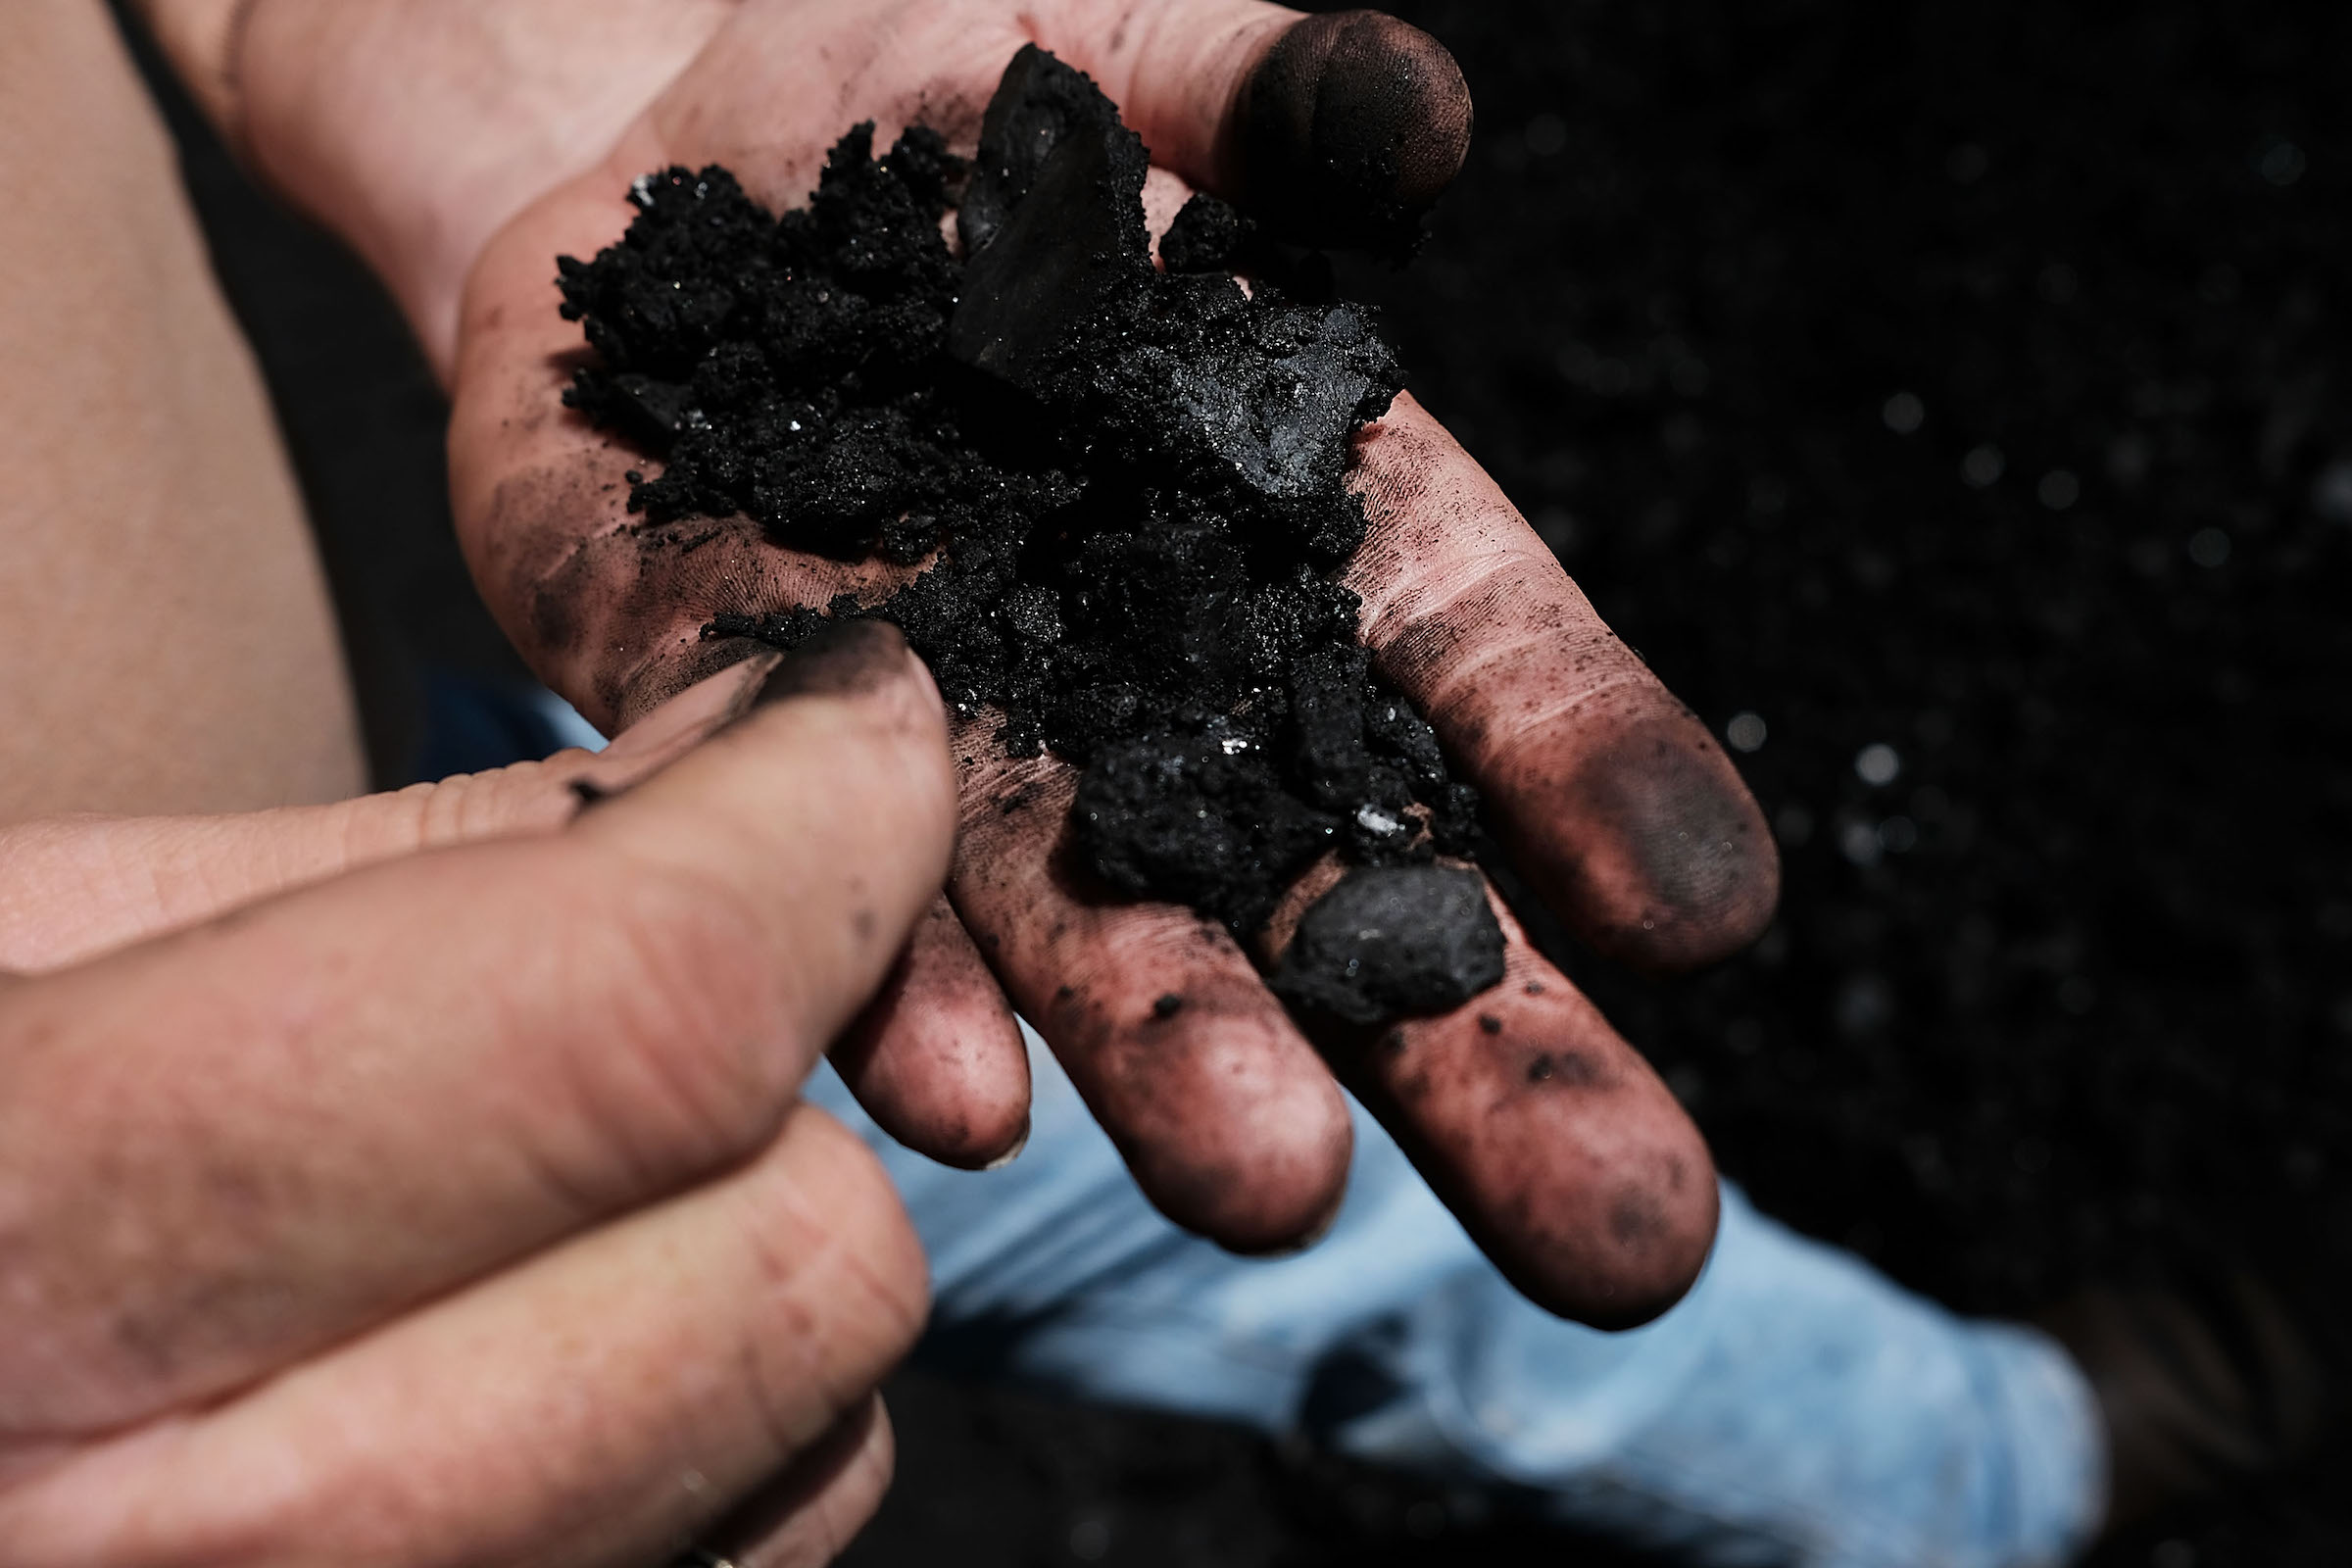 A worker in the coal industry handles coal at a coal prep plant on May 19, 2017 outside the city of Welch, West Virginia. (Spencer Platt&mdash;Getty Images)